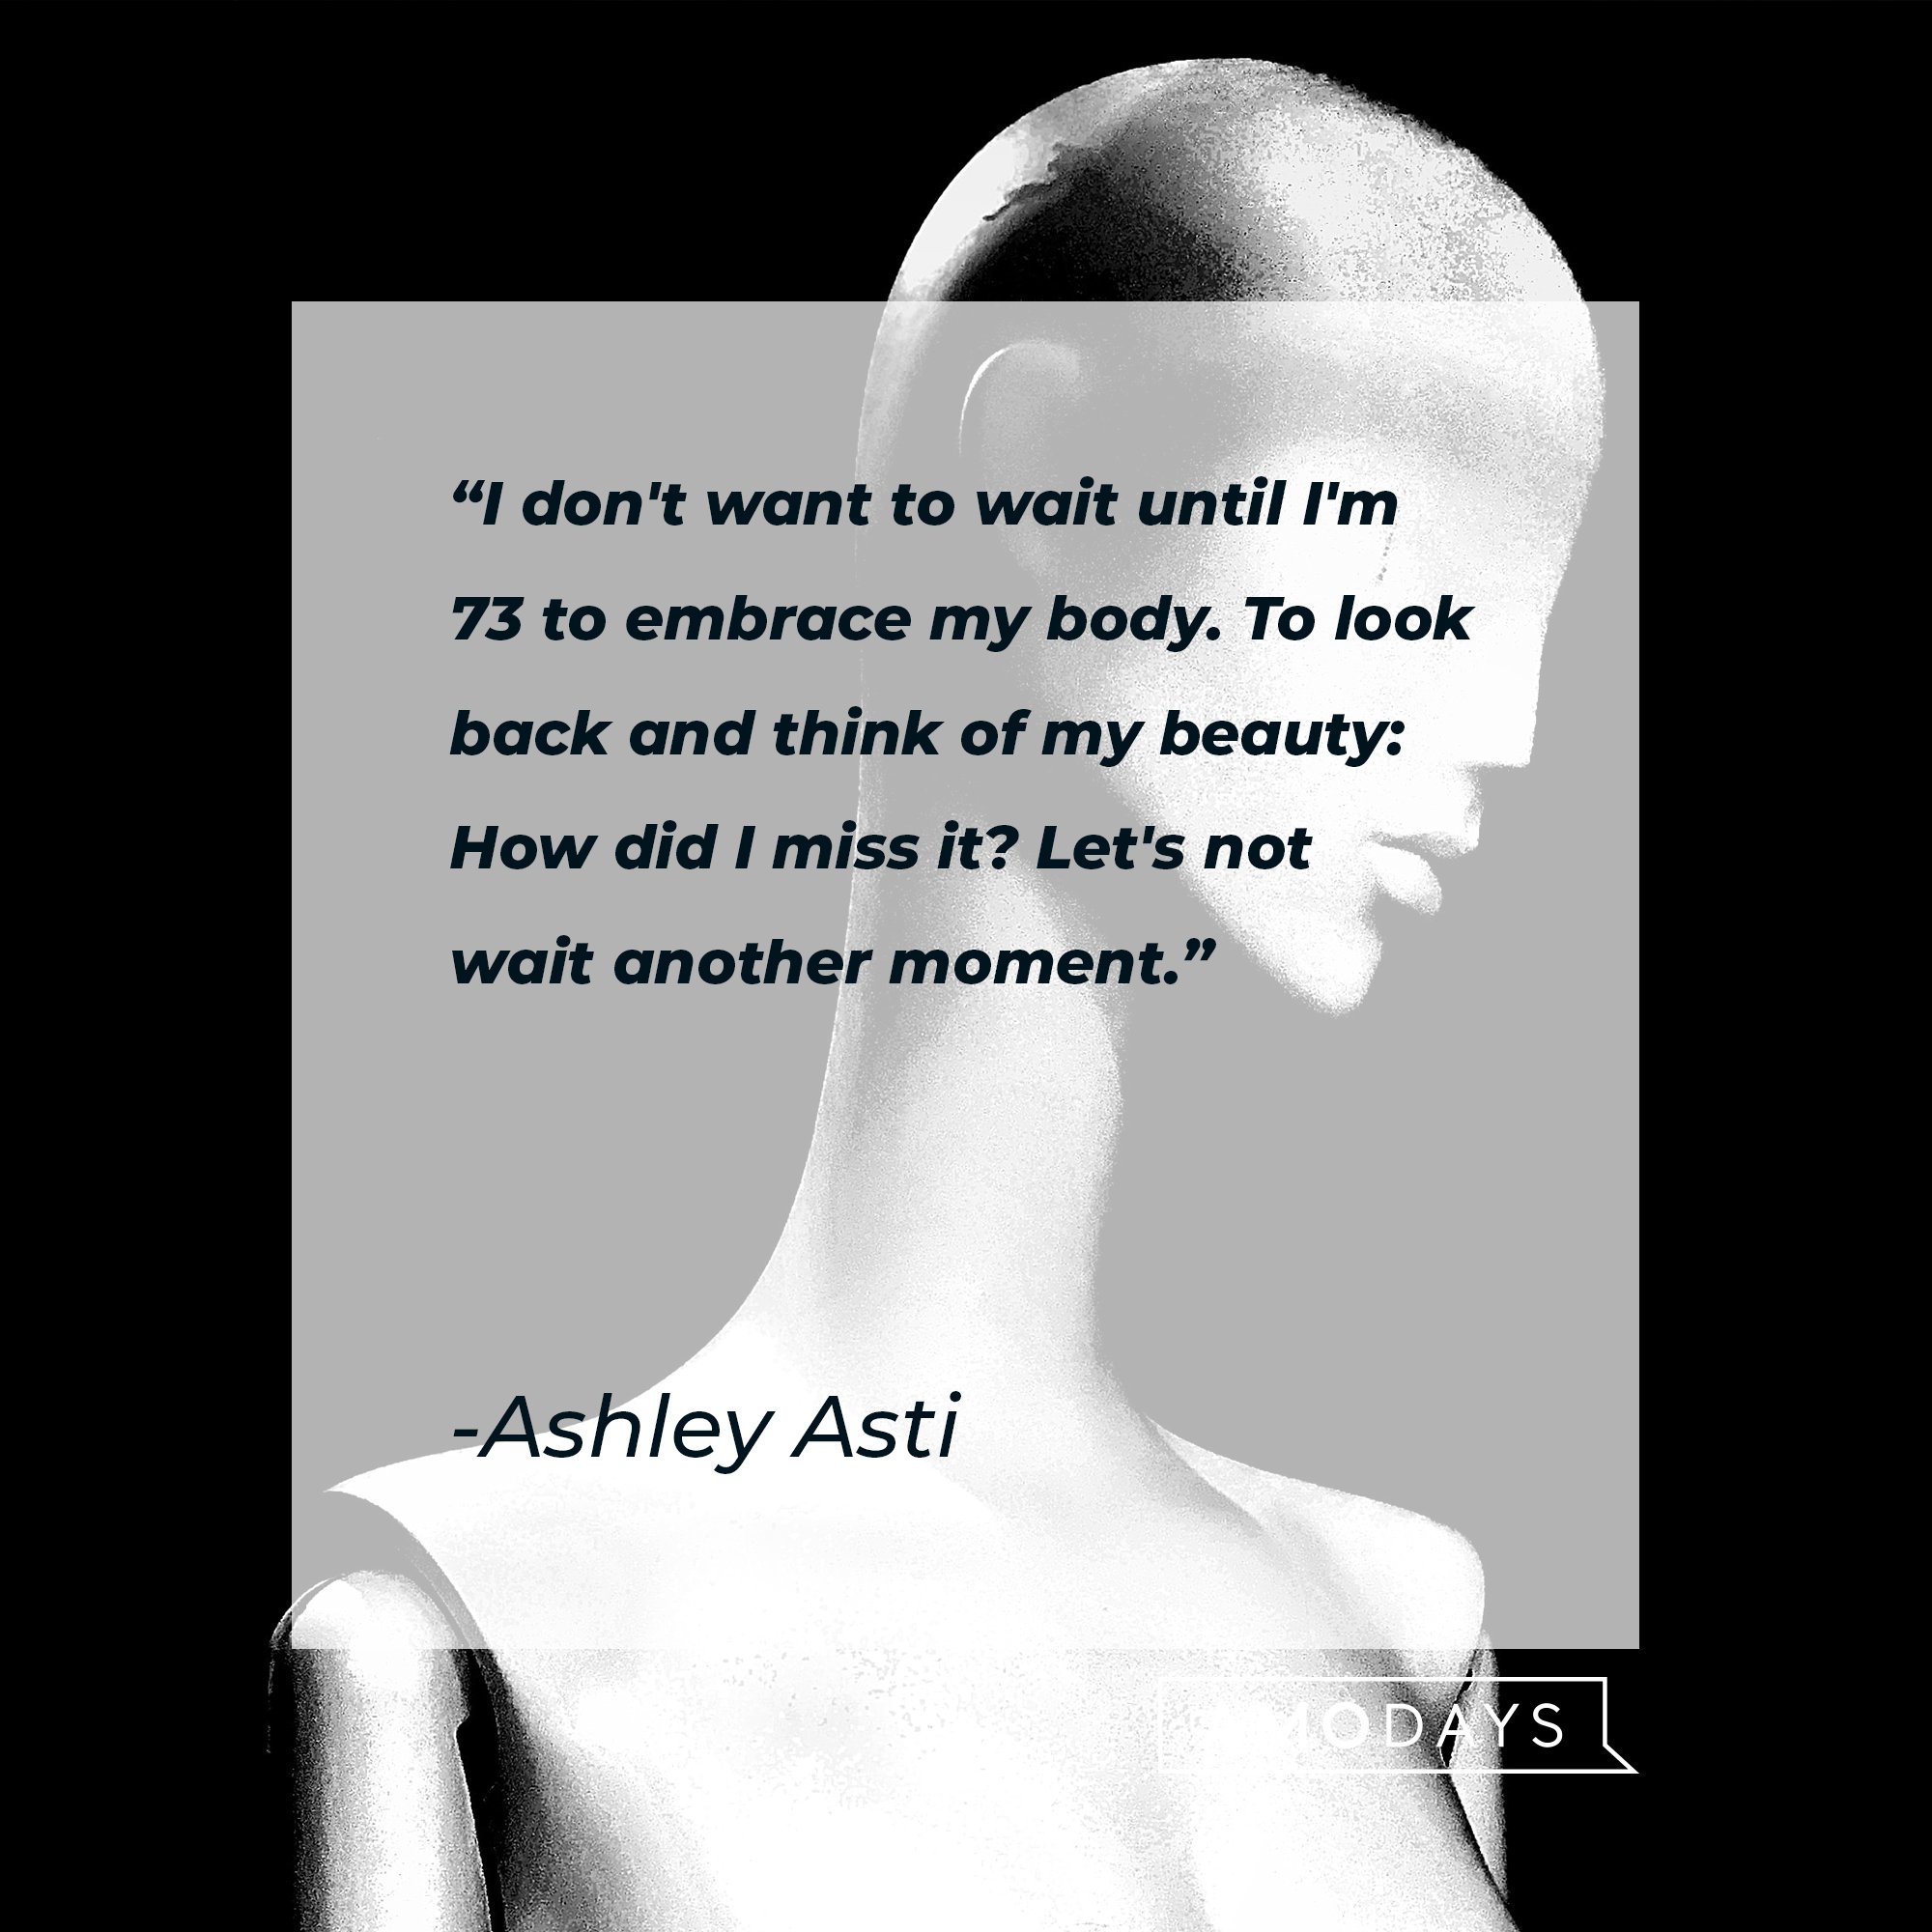 Ashley Asti’s quote: "I don't want to wait until I'm 73 to embrace my body. To look back and think of my beauty: How did I miss it? Let's not wait another moment." | Image: AmoDays